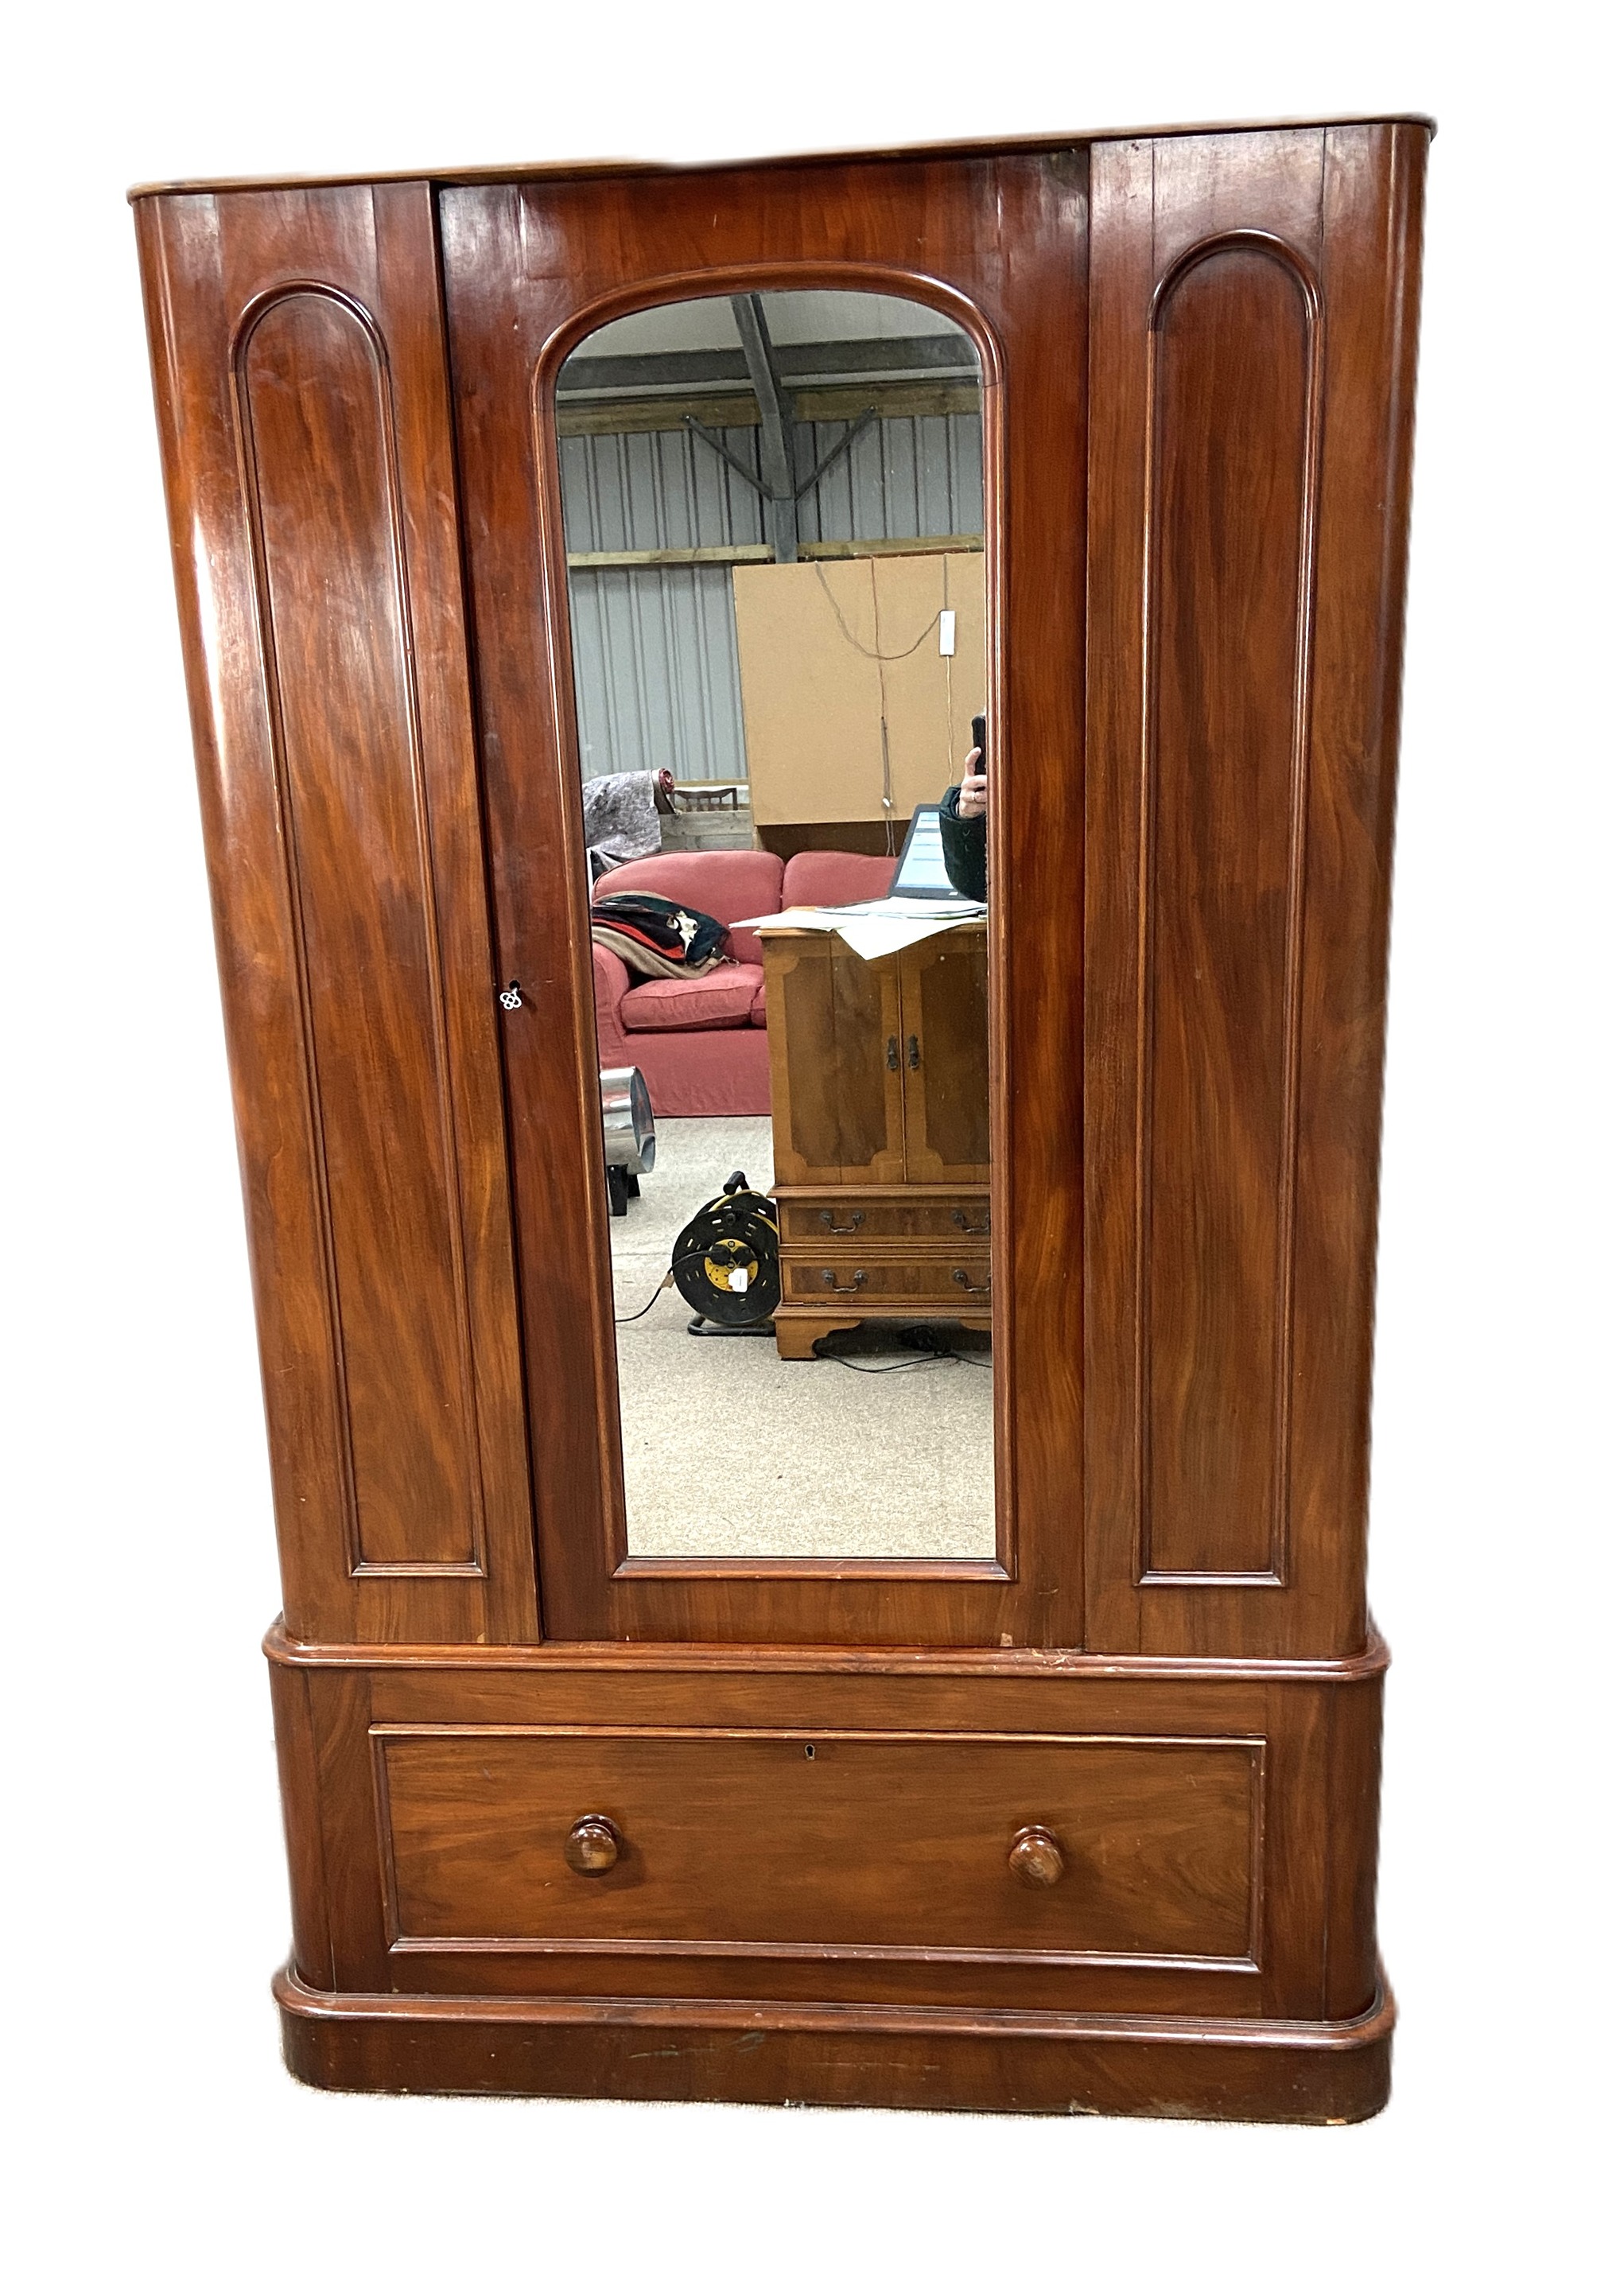 A Victorian mahogany single warbrobe, with mirrored arched door over a long drawer. (lacks